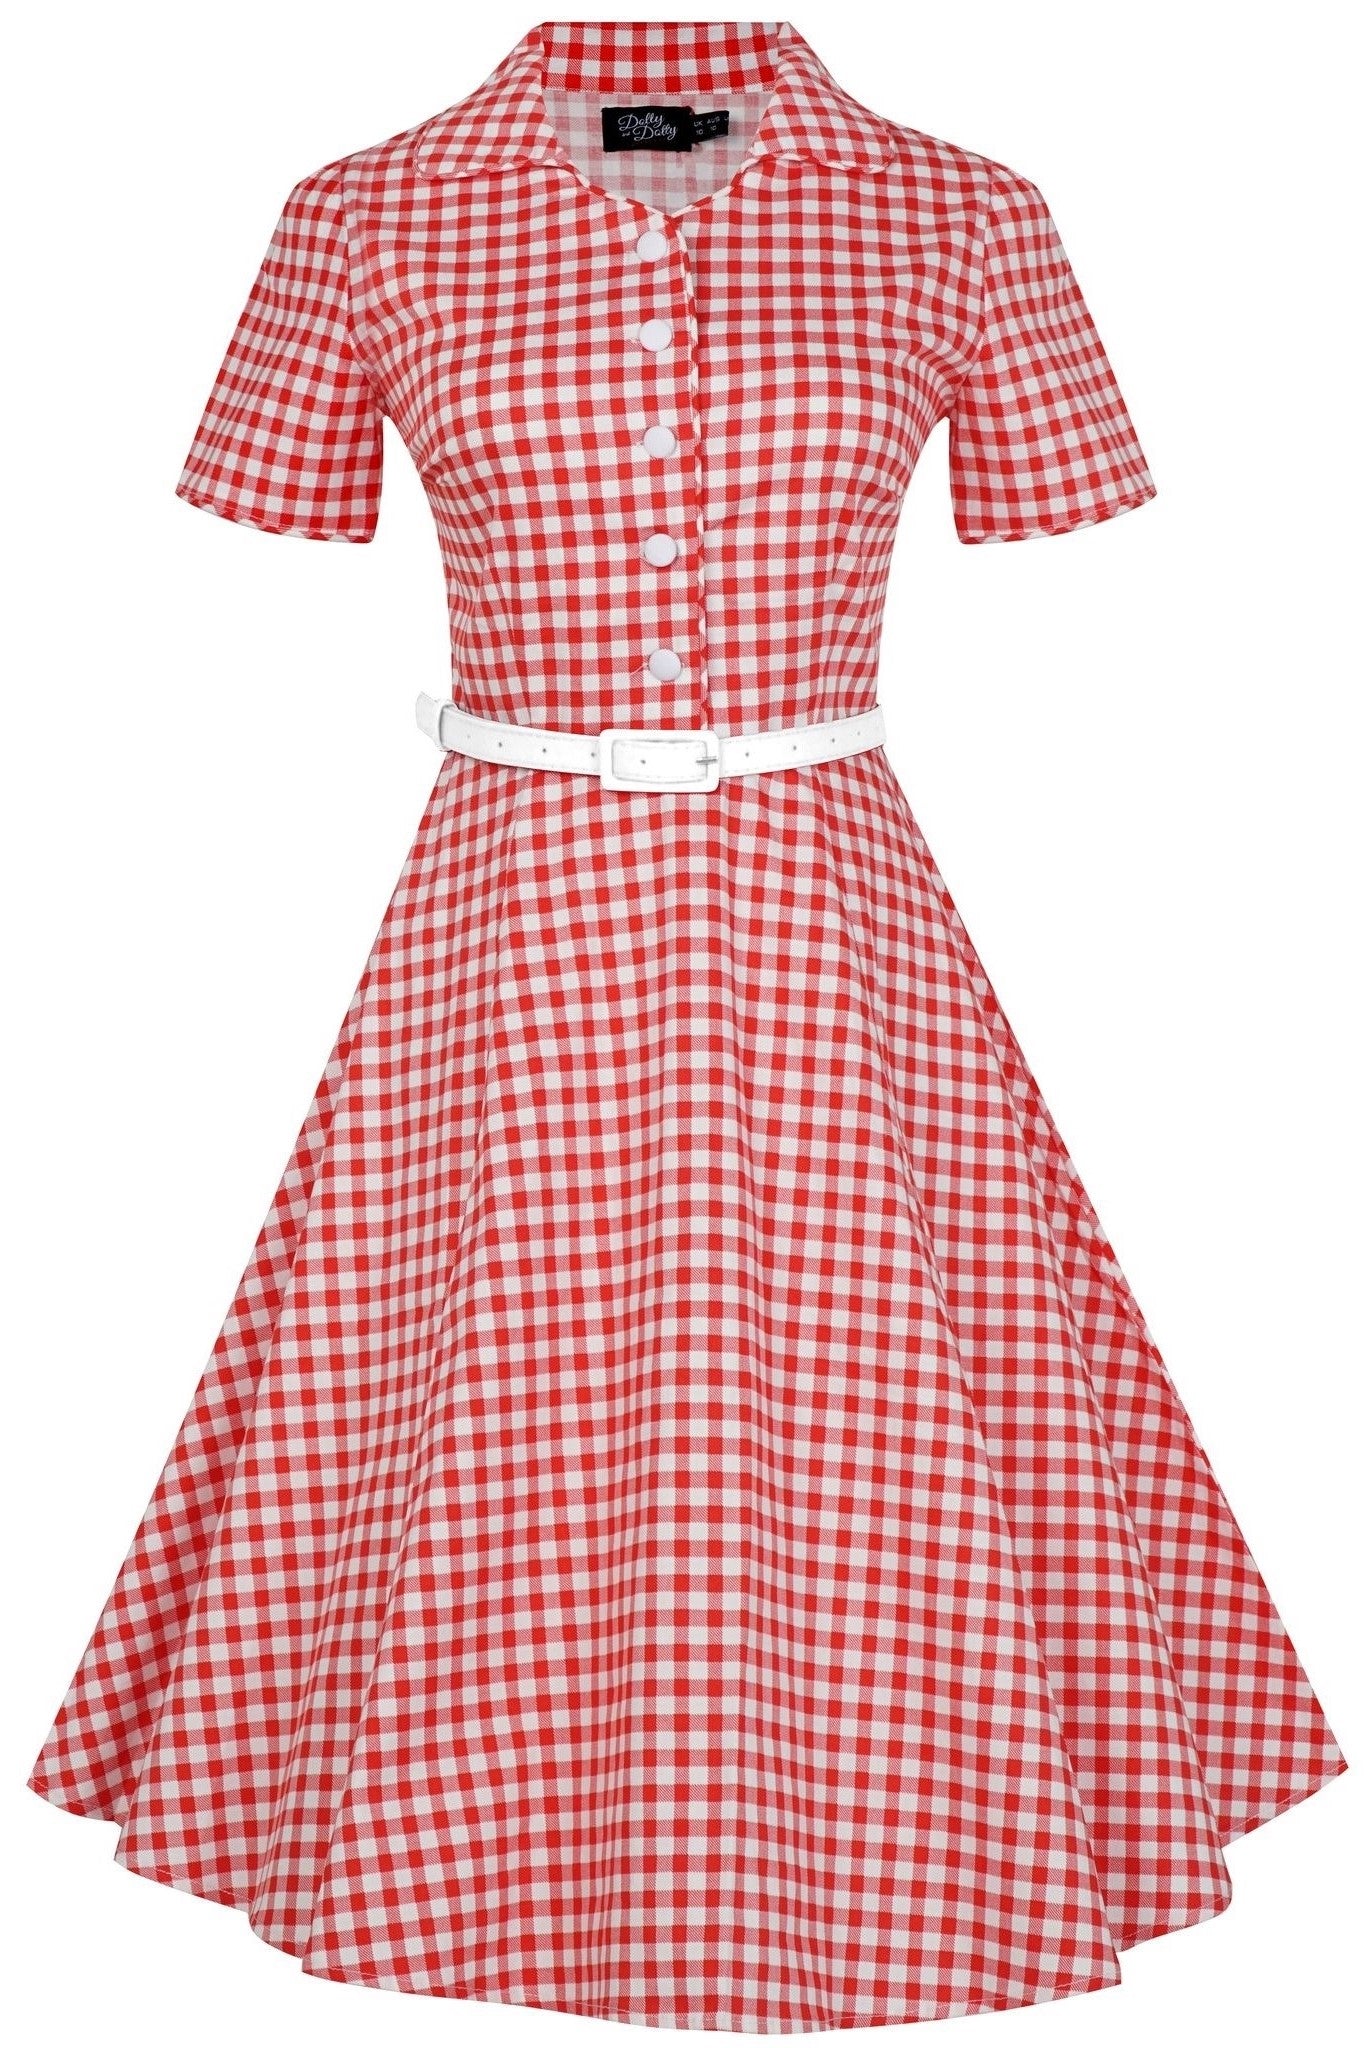 Short sleeve Penelope dress, in red and white gingham print, front view